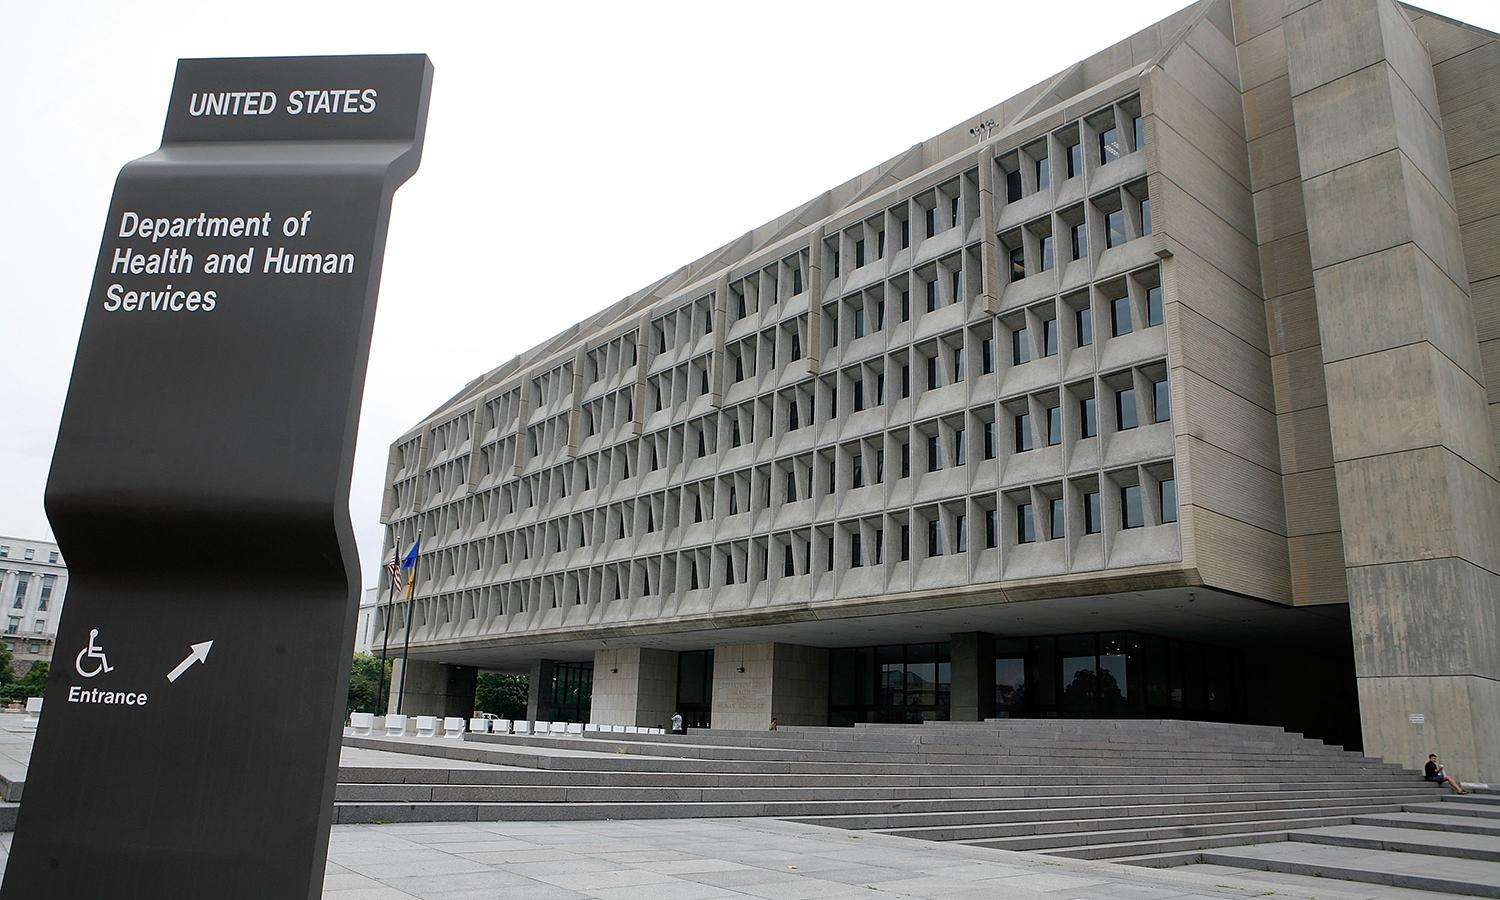 The exterior of the U.S. Department of Health and Human Services is seen